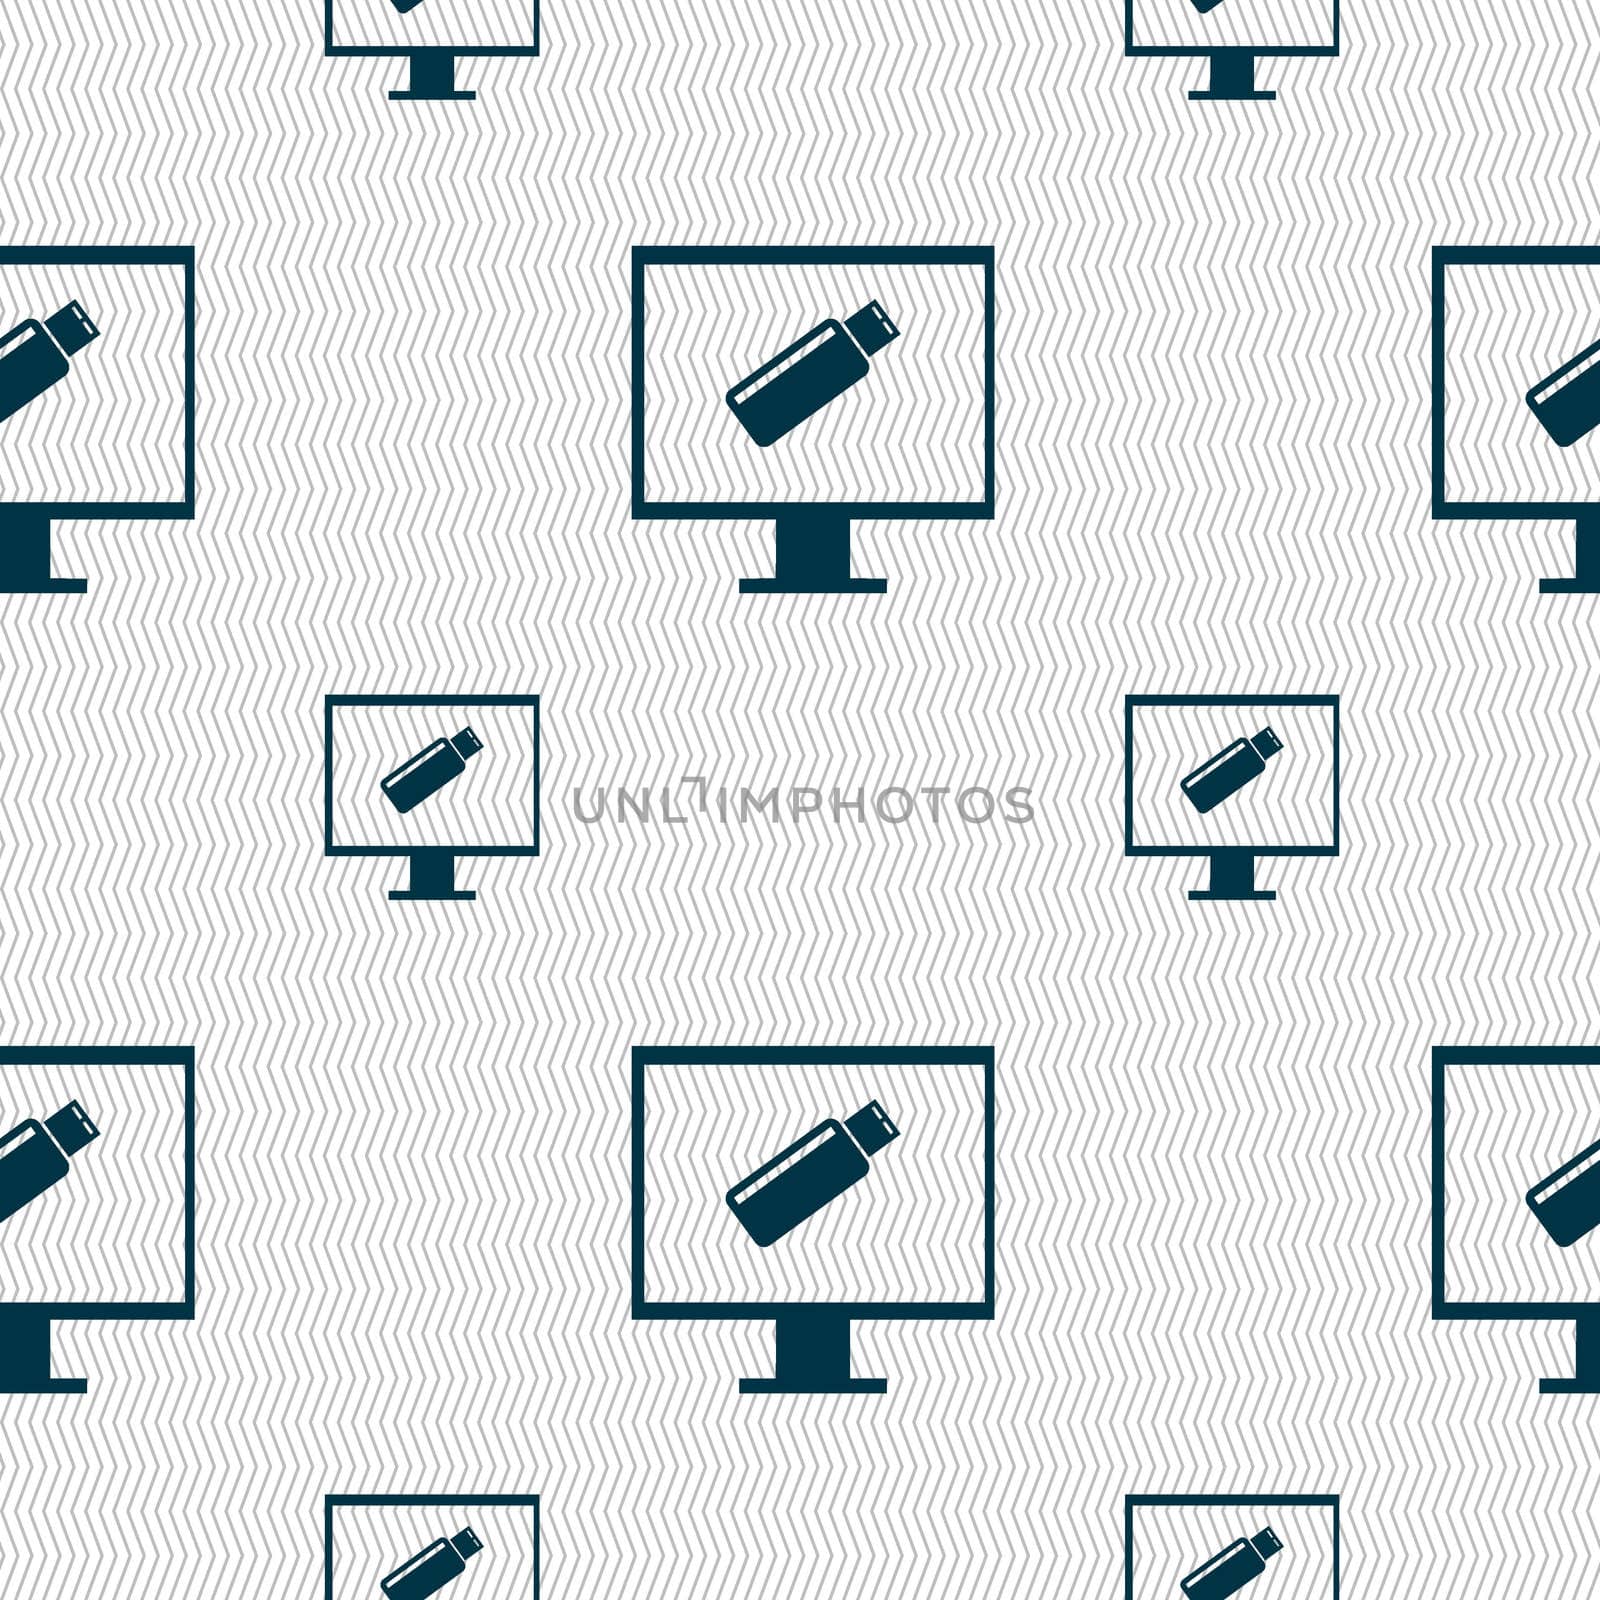 usb flash drive and monitor sign icon. Video game symbol. Seamless pattern with geometric texture. illustration